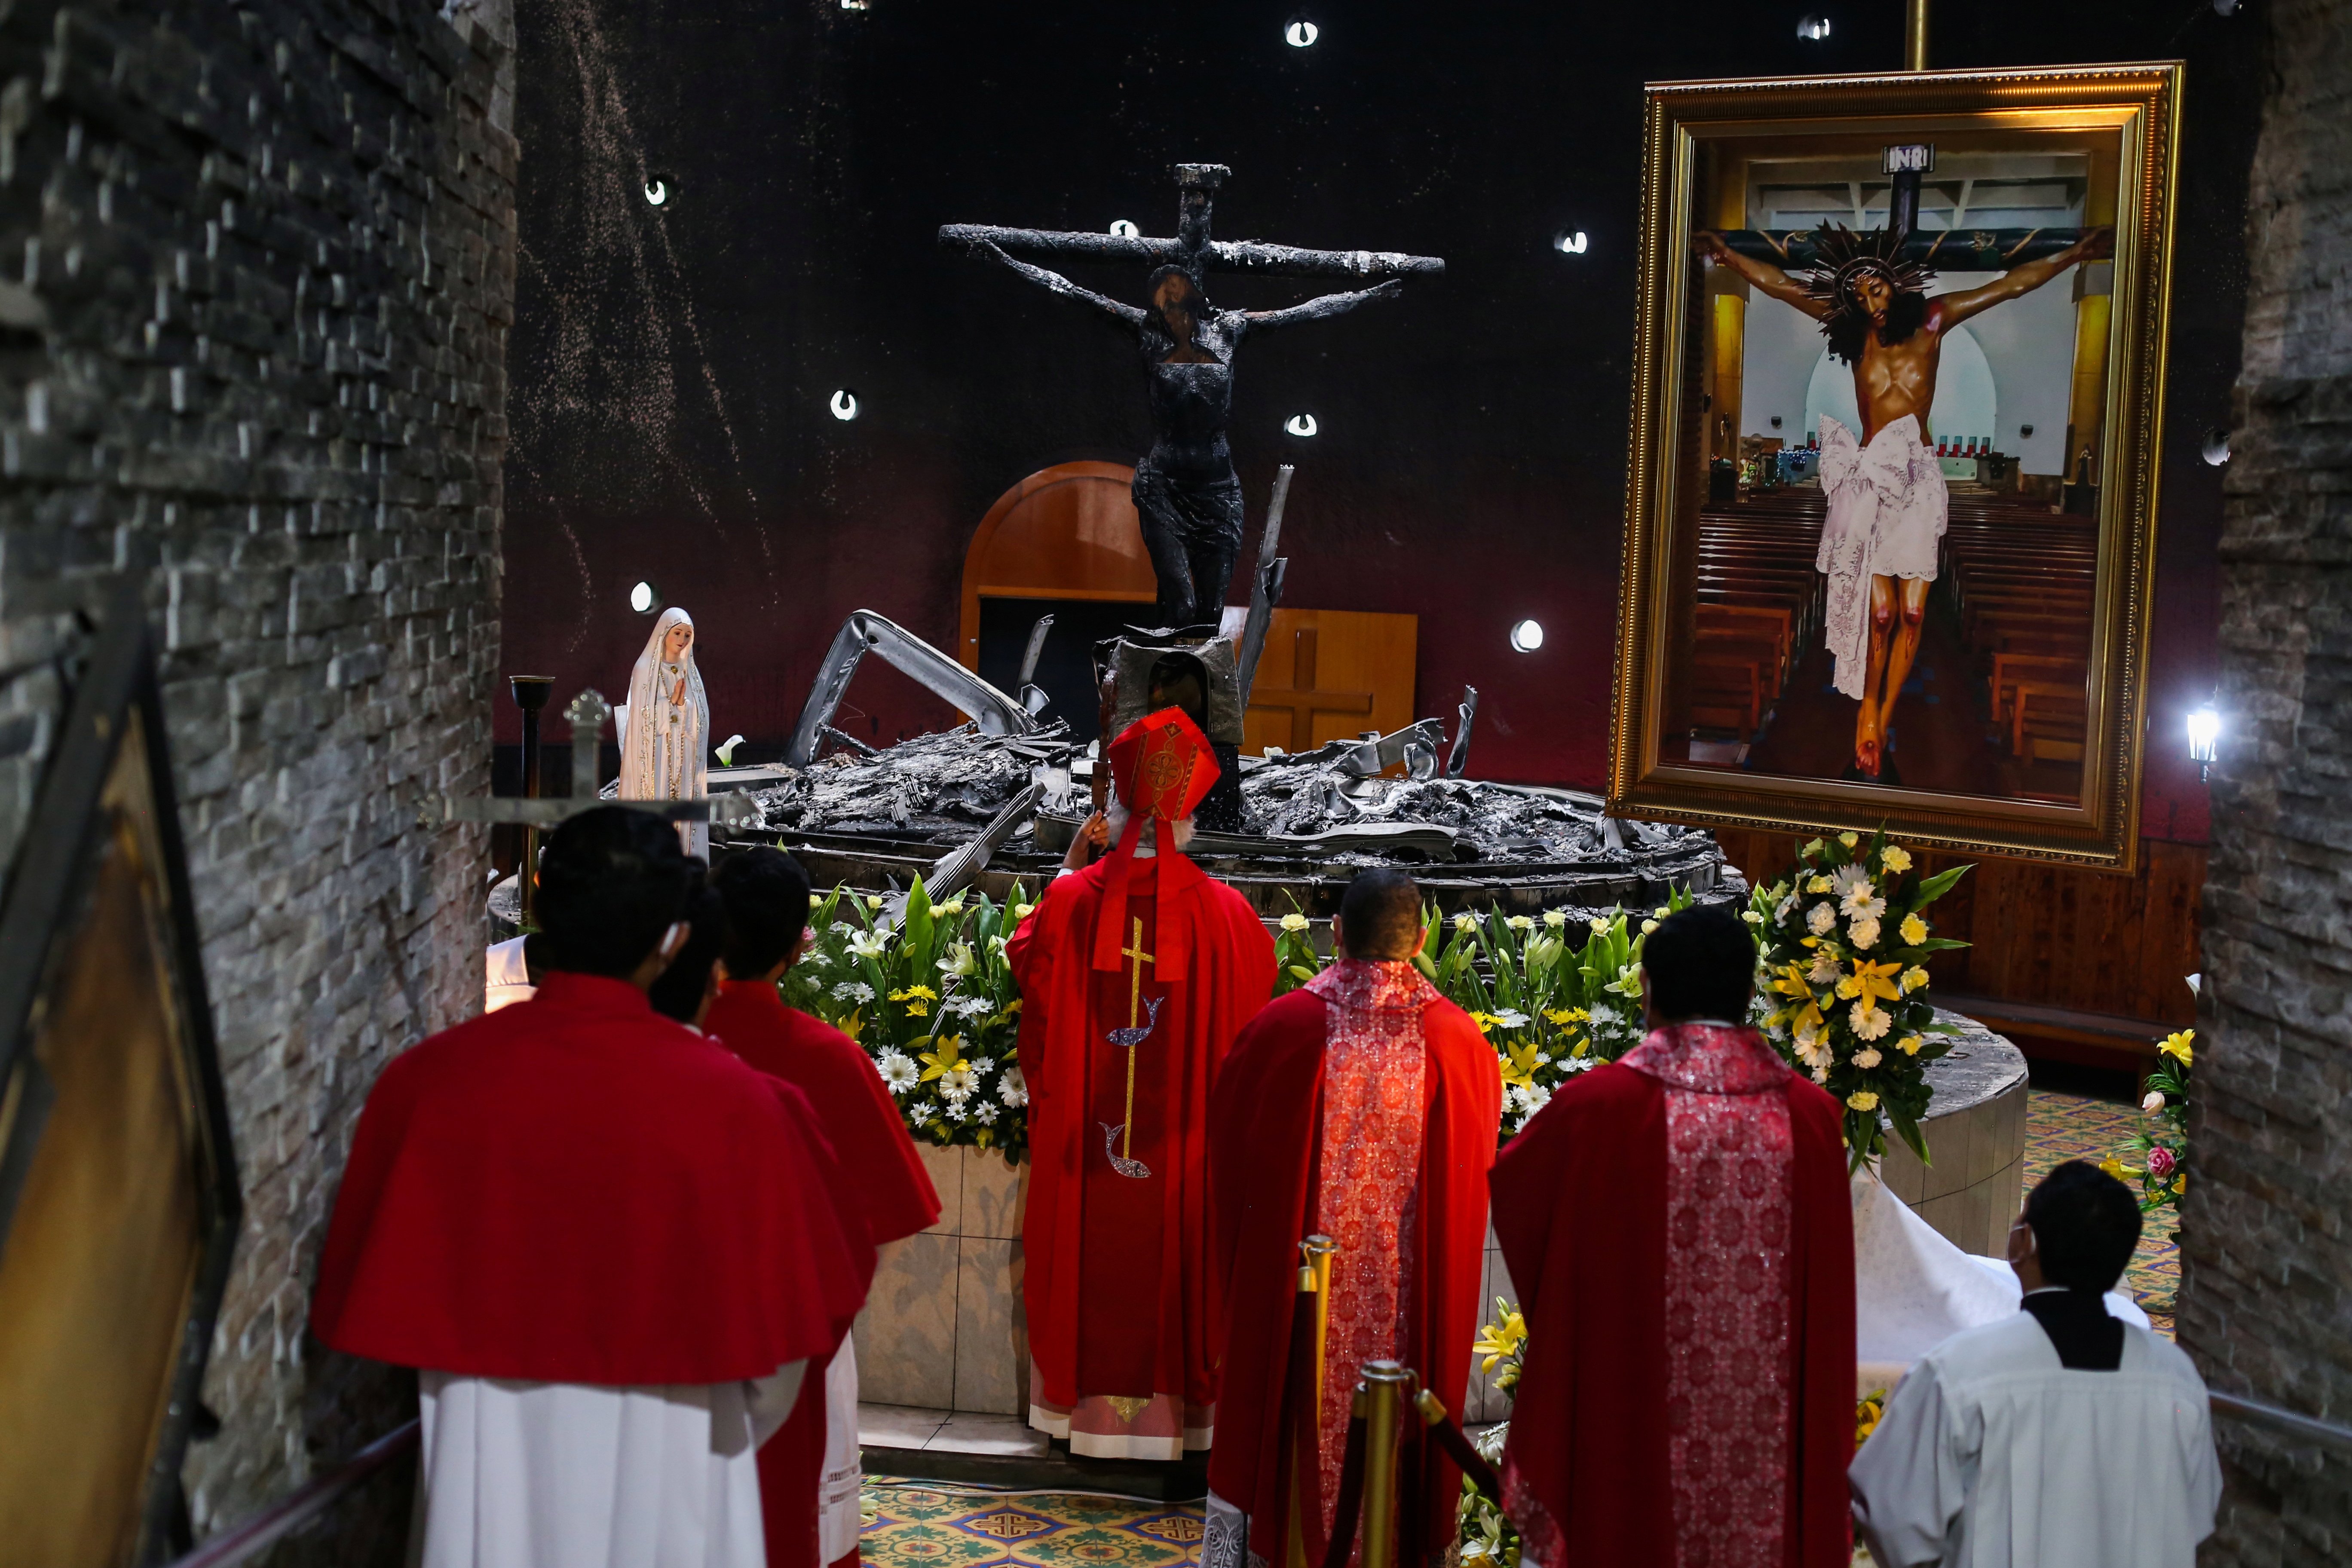 Nicaraguan Cardinal Leopoldo Brenes Solorzano of Managua prays as he celebrates Mass at the Metropolitan Cathedral July 31, 2021. As the country marks a bicentennial Sept. 15, church leaders say "the political and social situation must not continue the sa